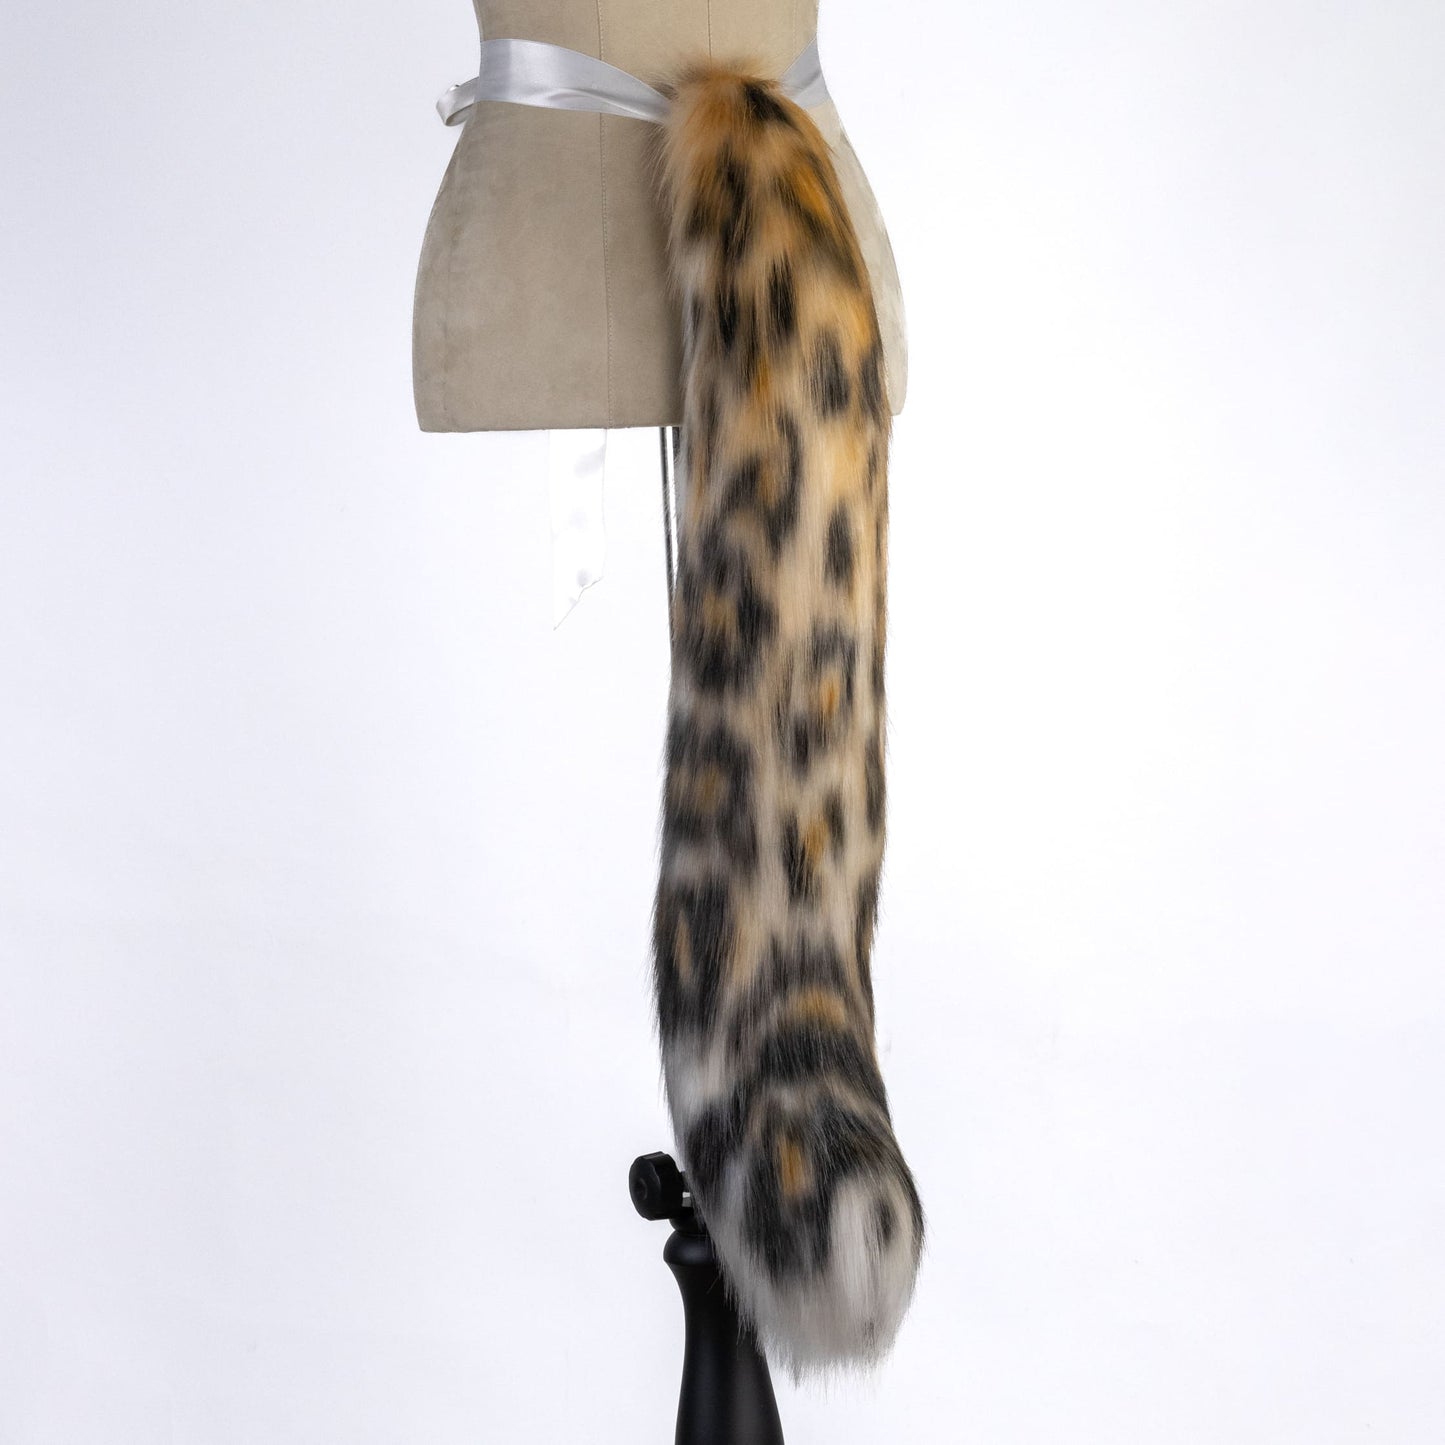 Leopard Ears and Tail Set